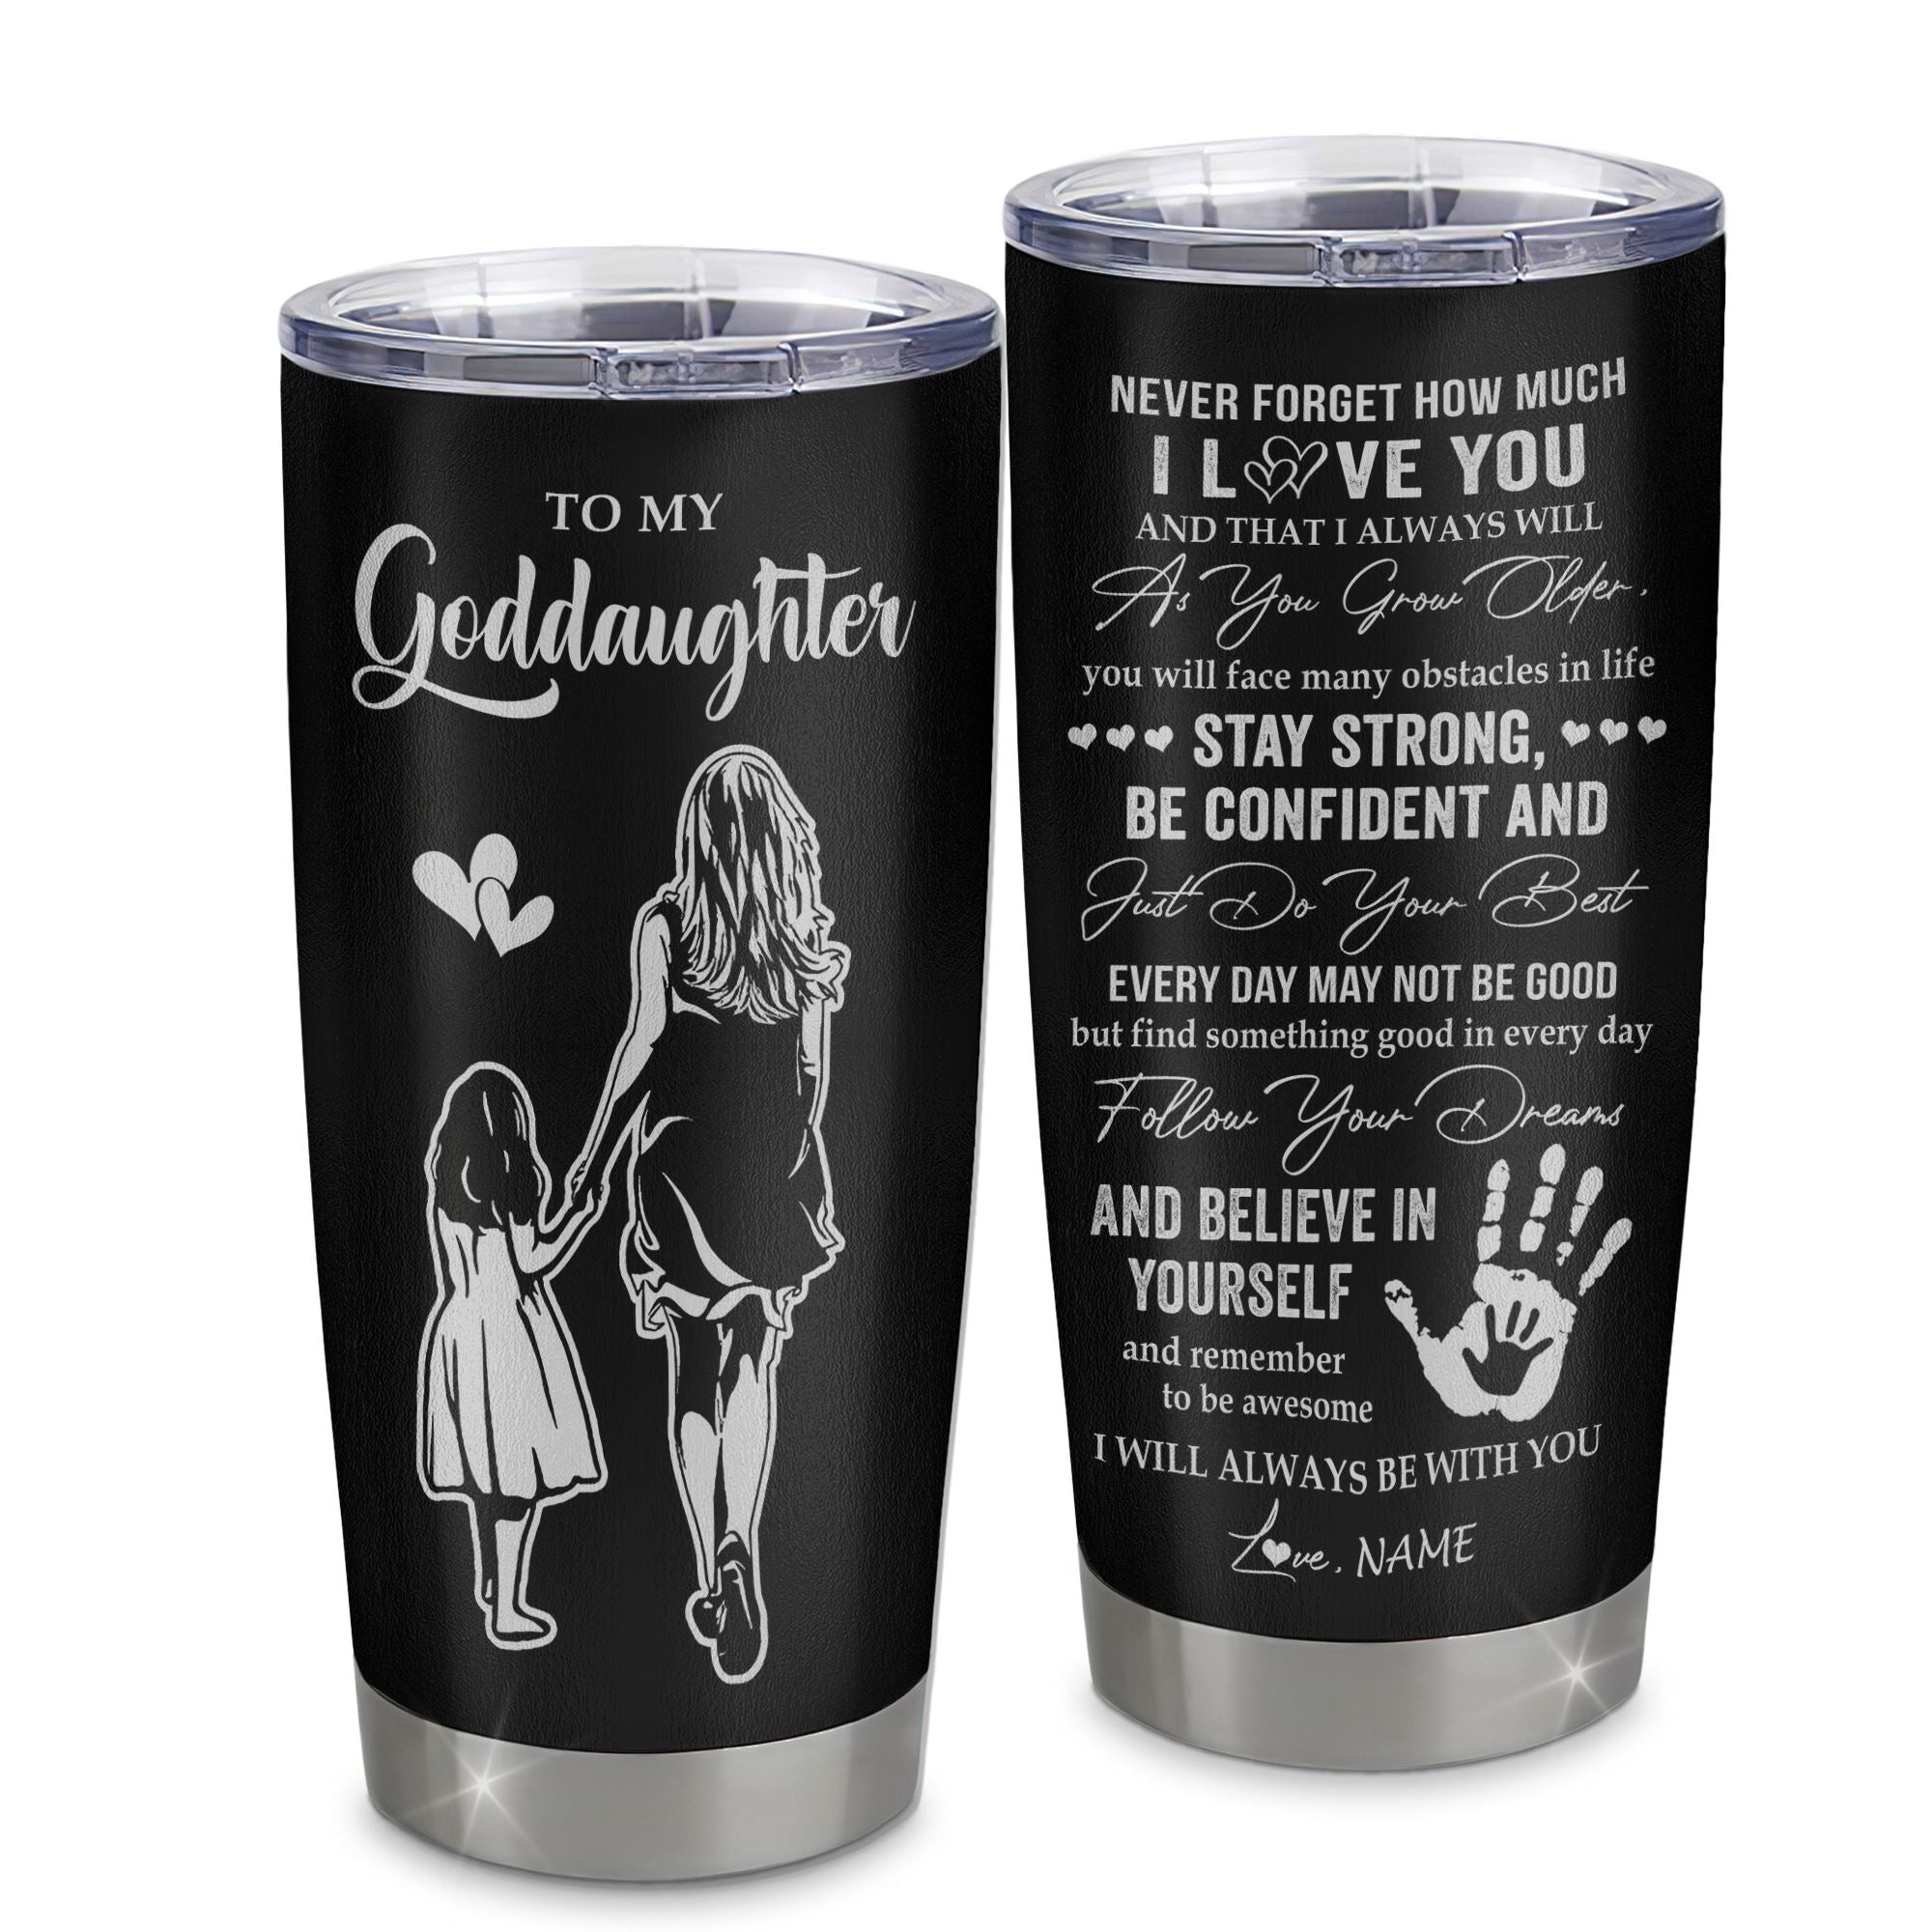 Personalized_To_My_Goddaughter_Tumbler_Stainless_Steel_Cup_I_Love_You_Forever_From_Godmother_Goddaughter_Birthday_Gifts_Christmas_Graduation_Custom_Travel_Mug_Tumbler_mockup_1.jpg